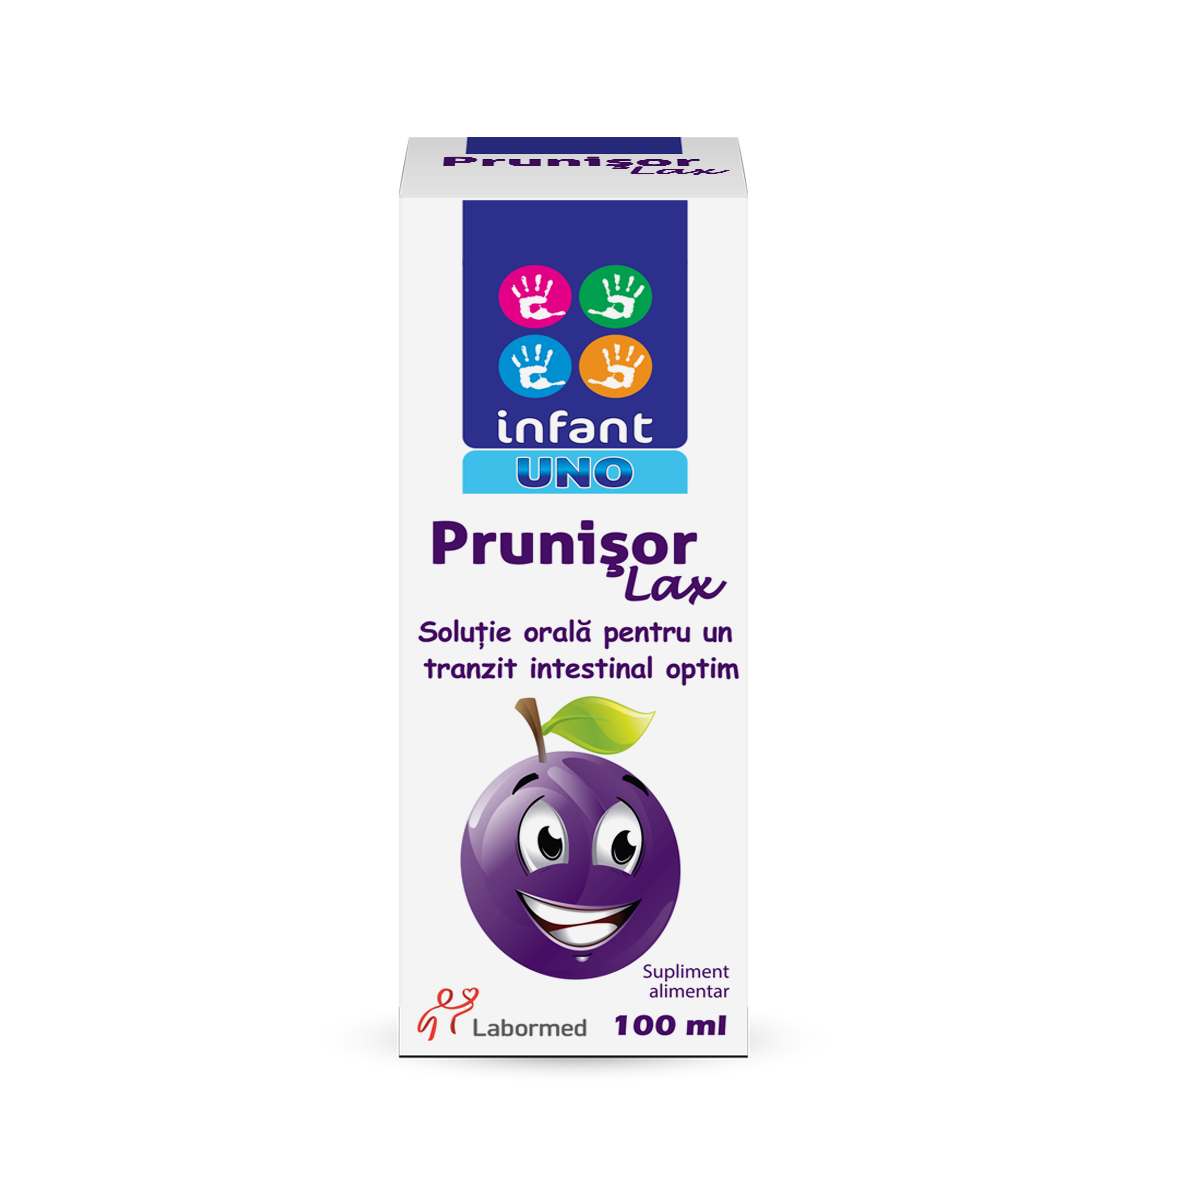 Infant Uno Prunisor Lax, 100 ml, Labormed